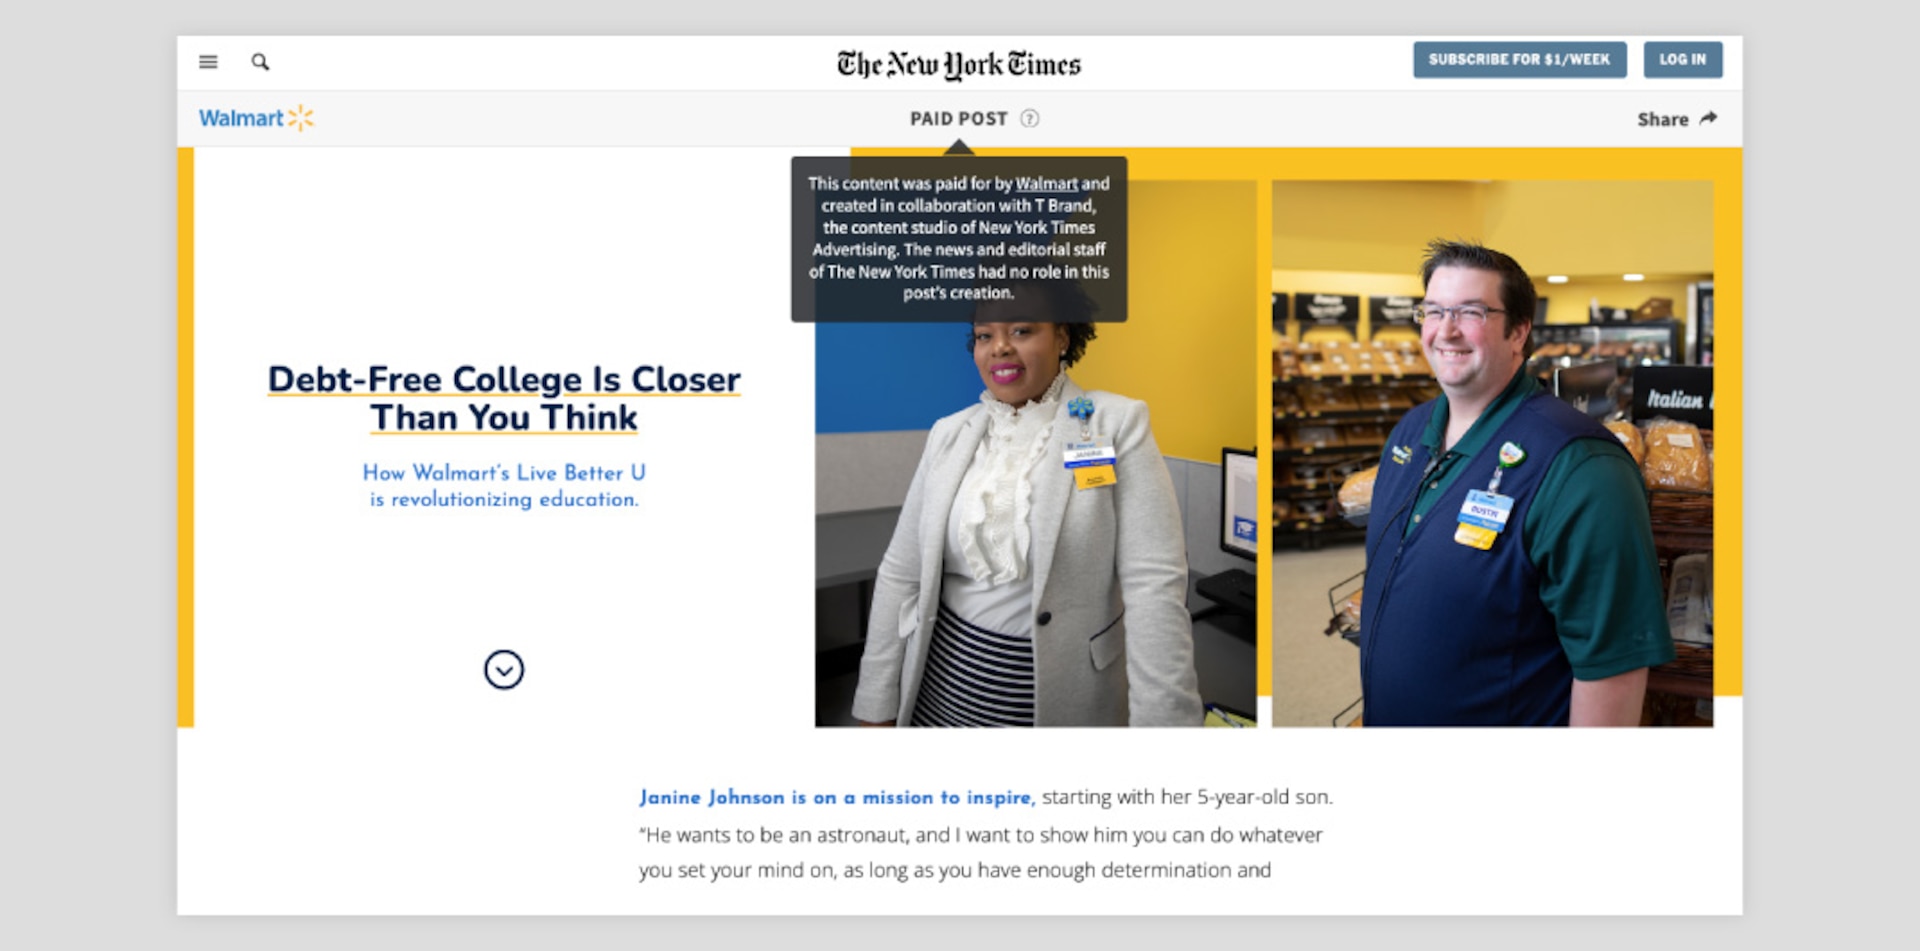 Screenshot of  a paid Walmart ad that has the appearance of a news article. There is a small "Paid Post" label under the New York Times banner at the top-center of the page. The mouse pointer was placed over that label in order to reveal a small pop-out window containing the paid post disclaimer. The ad/article contains two photographs of Walmart employees wearing name tags. The headline reads, "Debt-Free College Is Closer Than You Think," and the sub headline reads, "How Walmart’s Live Better U is revolutionizing education." A portion of the ad/article body test is shown; it reads, "Janine Johnson is on a mission to inspire, starting with her 5-year-old son. “He wants to be an astronaut, and I want to show him you can do whatever you set your mind on, as long as you have enough determination and..."